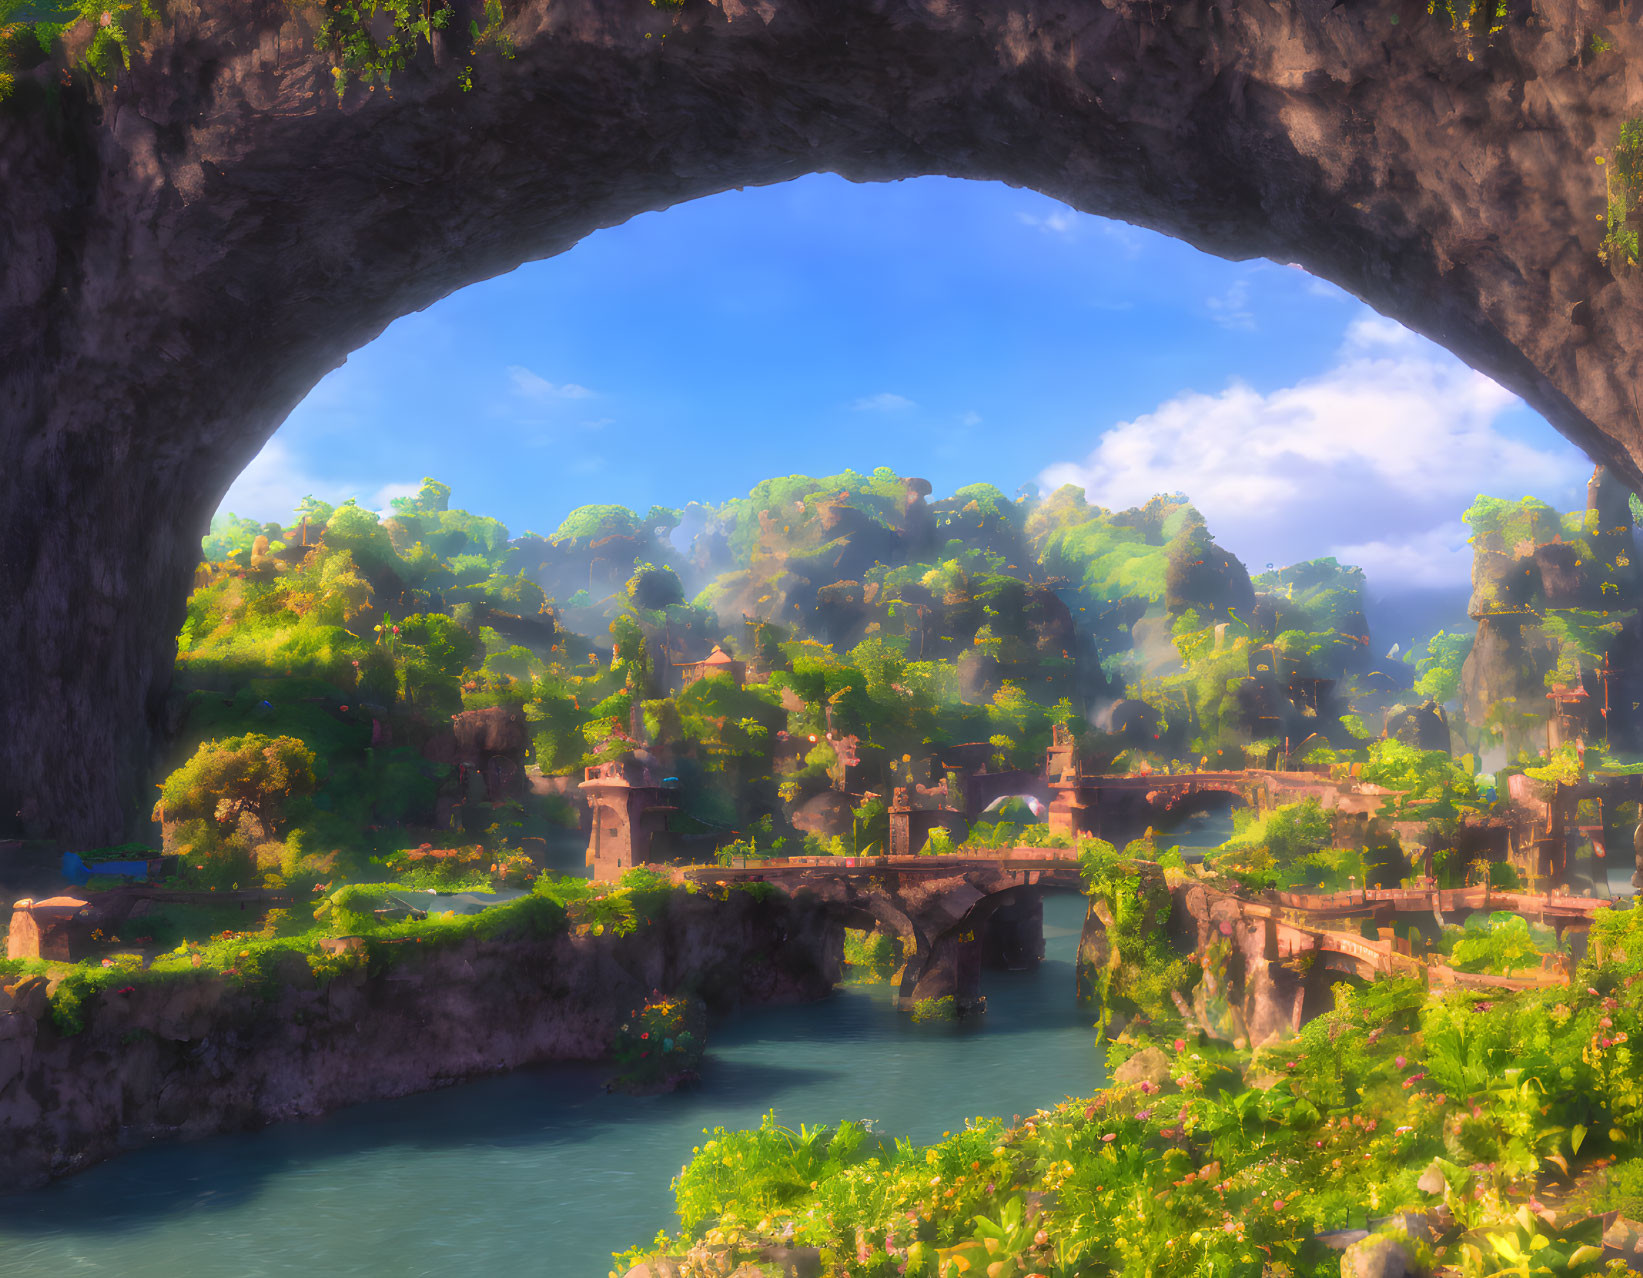 Tranquil fantasy landscape with stone bridge, ruins, lush greenery, and river.